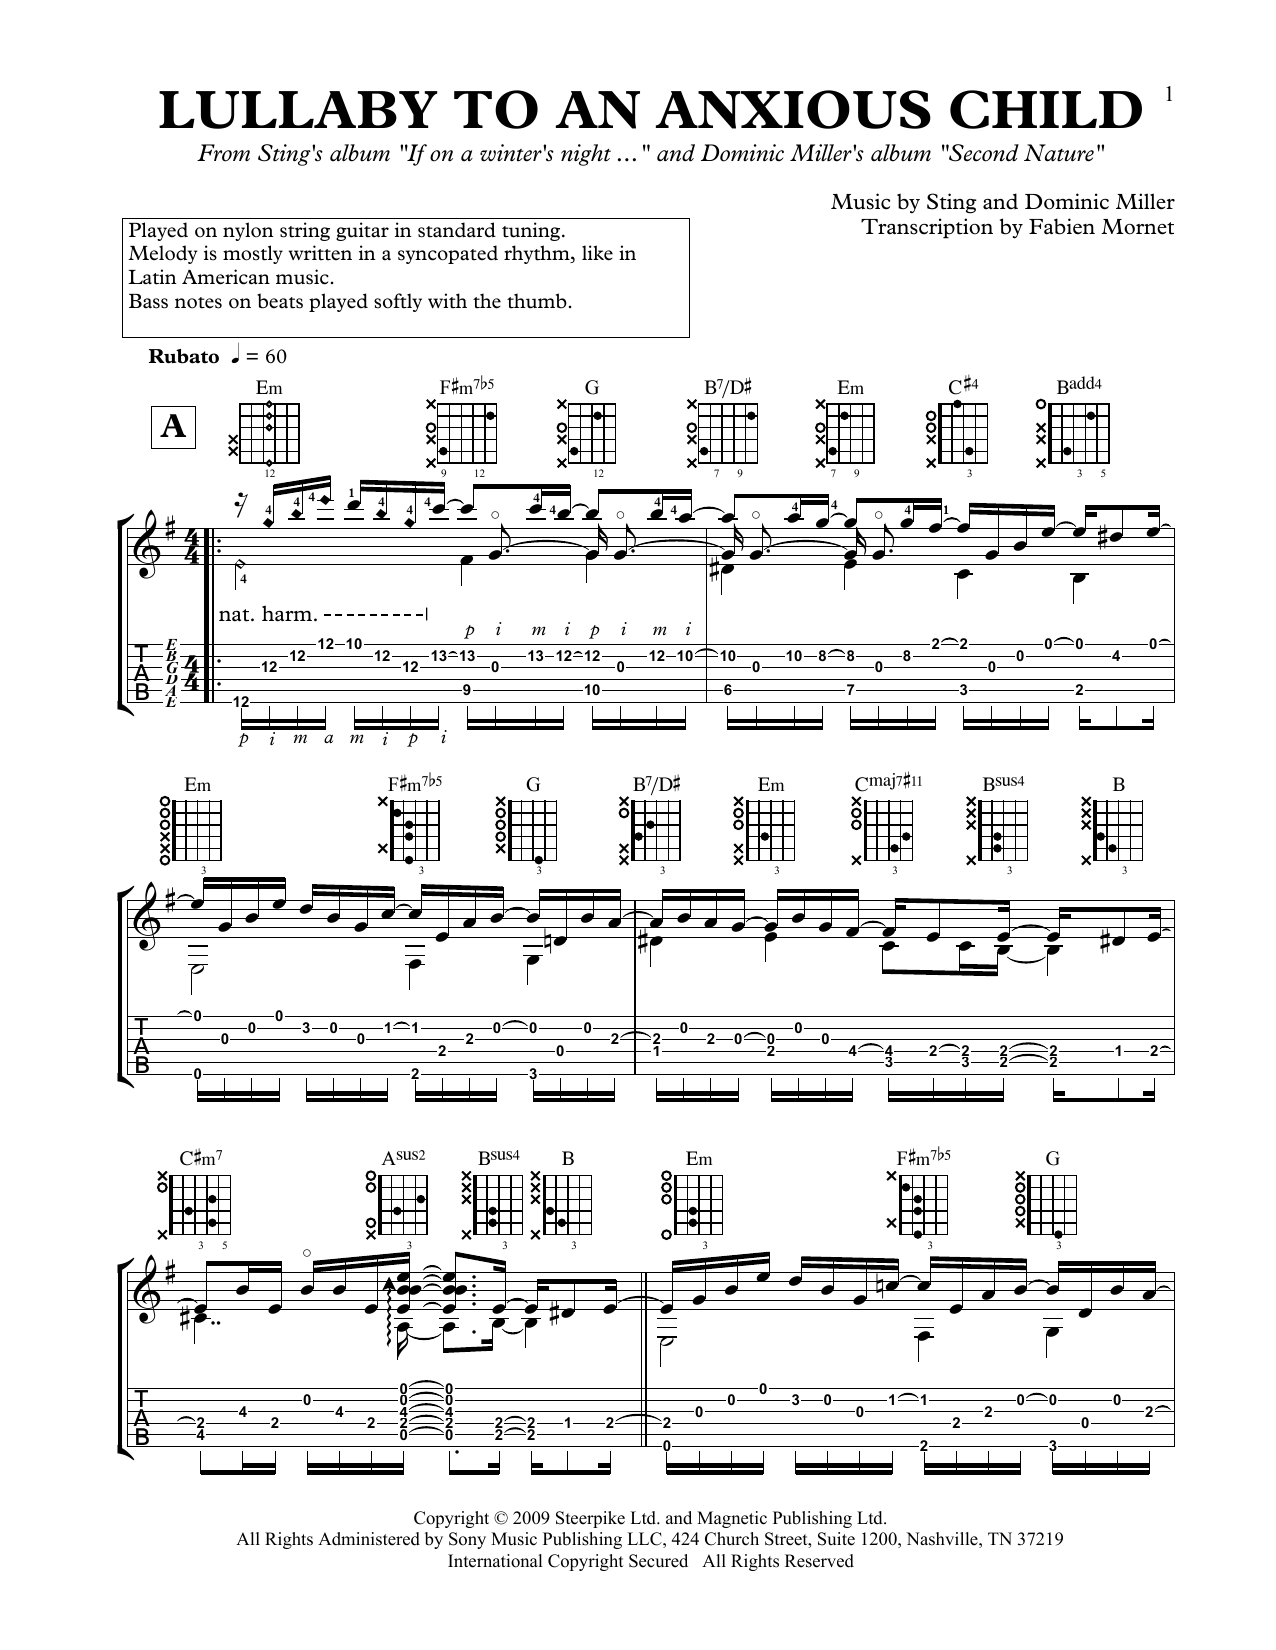 Download Dominic Miller Lullaby To An Anxious Child Sheet Music